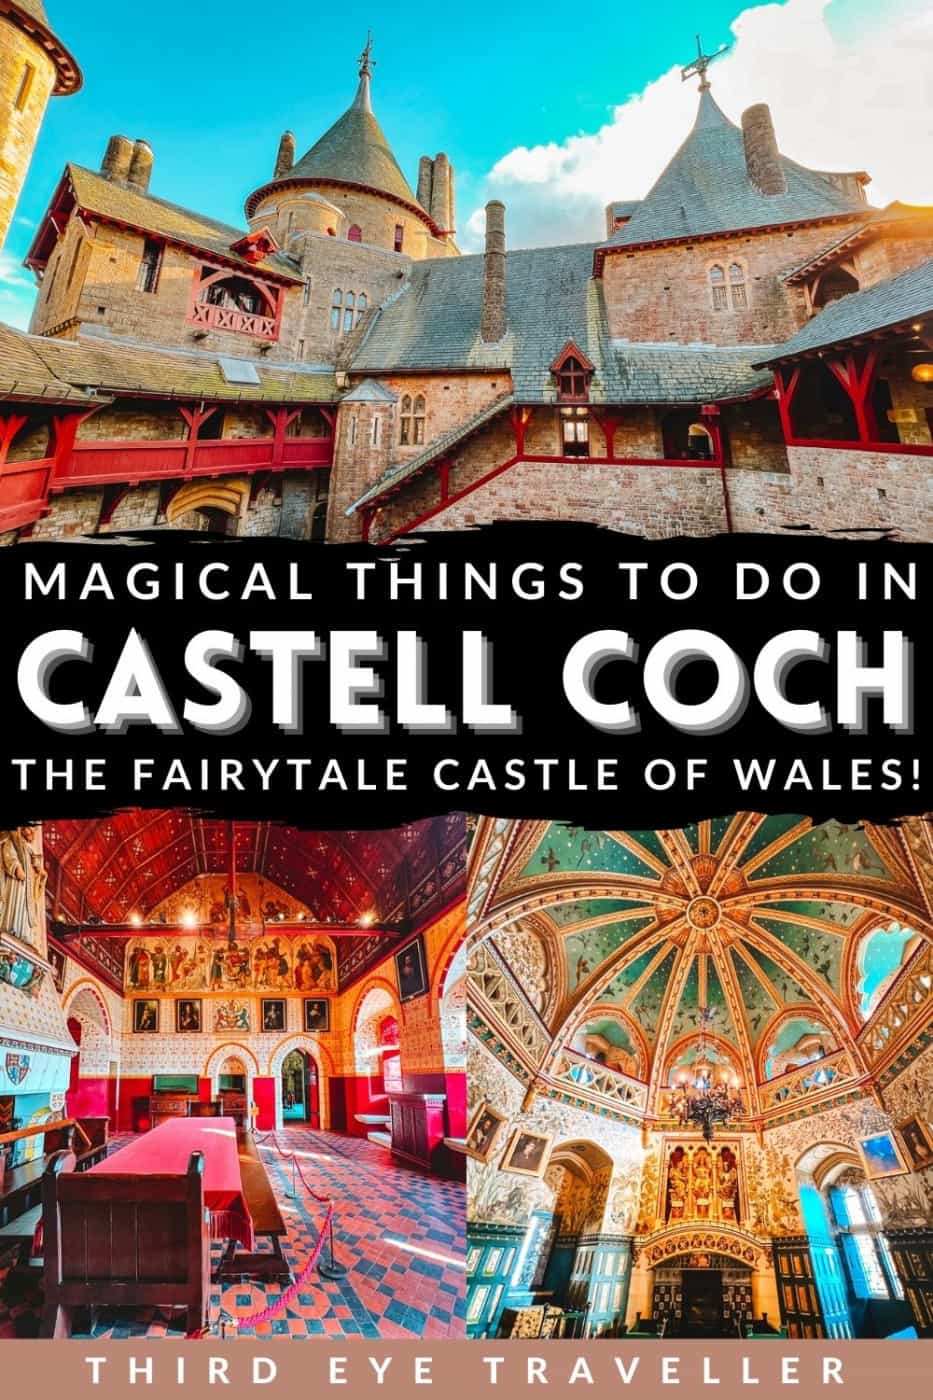 Things to do in Castell Coch Wales